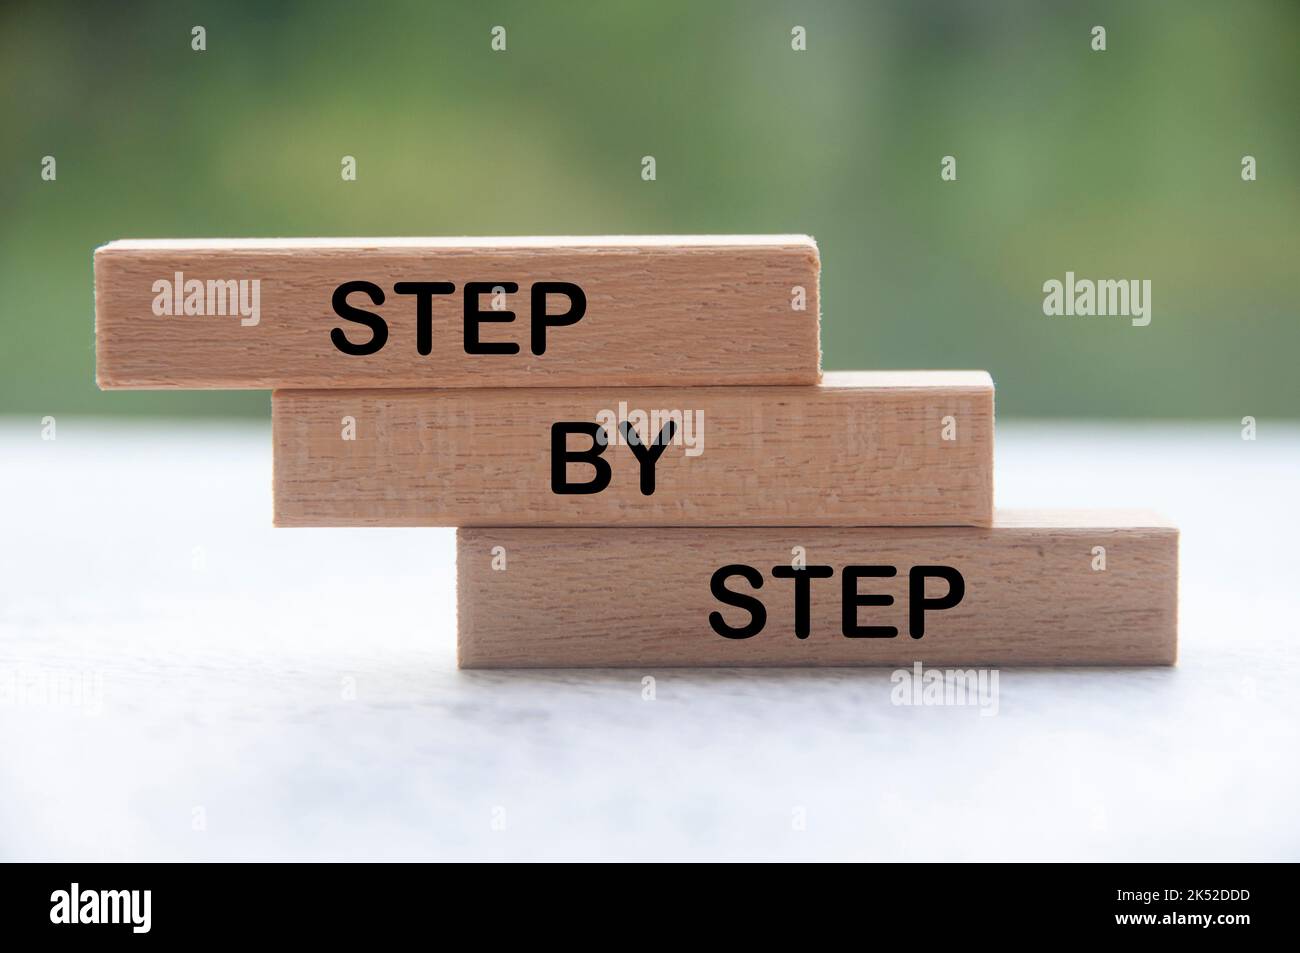 Step by step text on wooden blocks with blurred nature background Stock Photo